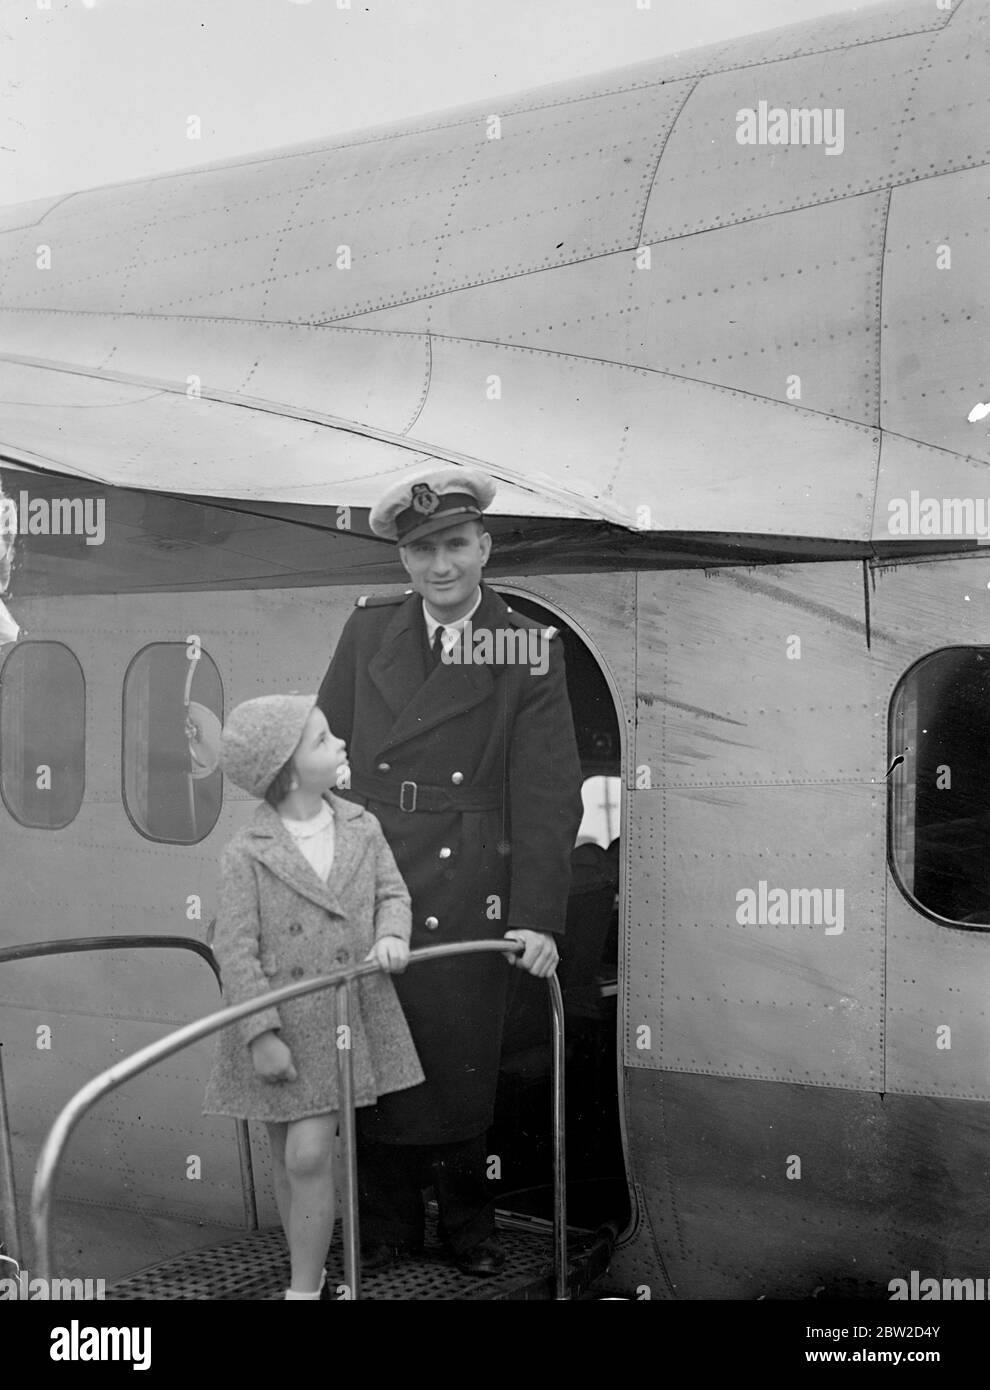 Sylvia Heyder who is only 7 1/2 years old arrived at Southampton in the Imperial Airways flying - boat Carpentaria from Lorenco Marques, Portuguese East Africa, to stay with her grandmother in Liverpool. Sylvia was accompanied by her parents. Photo shows Sylvia Heyder leaving the flying boat at Southampton. 23 June 1939 Stock Photo